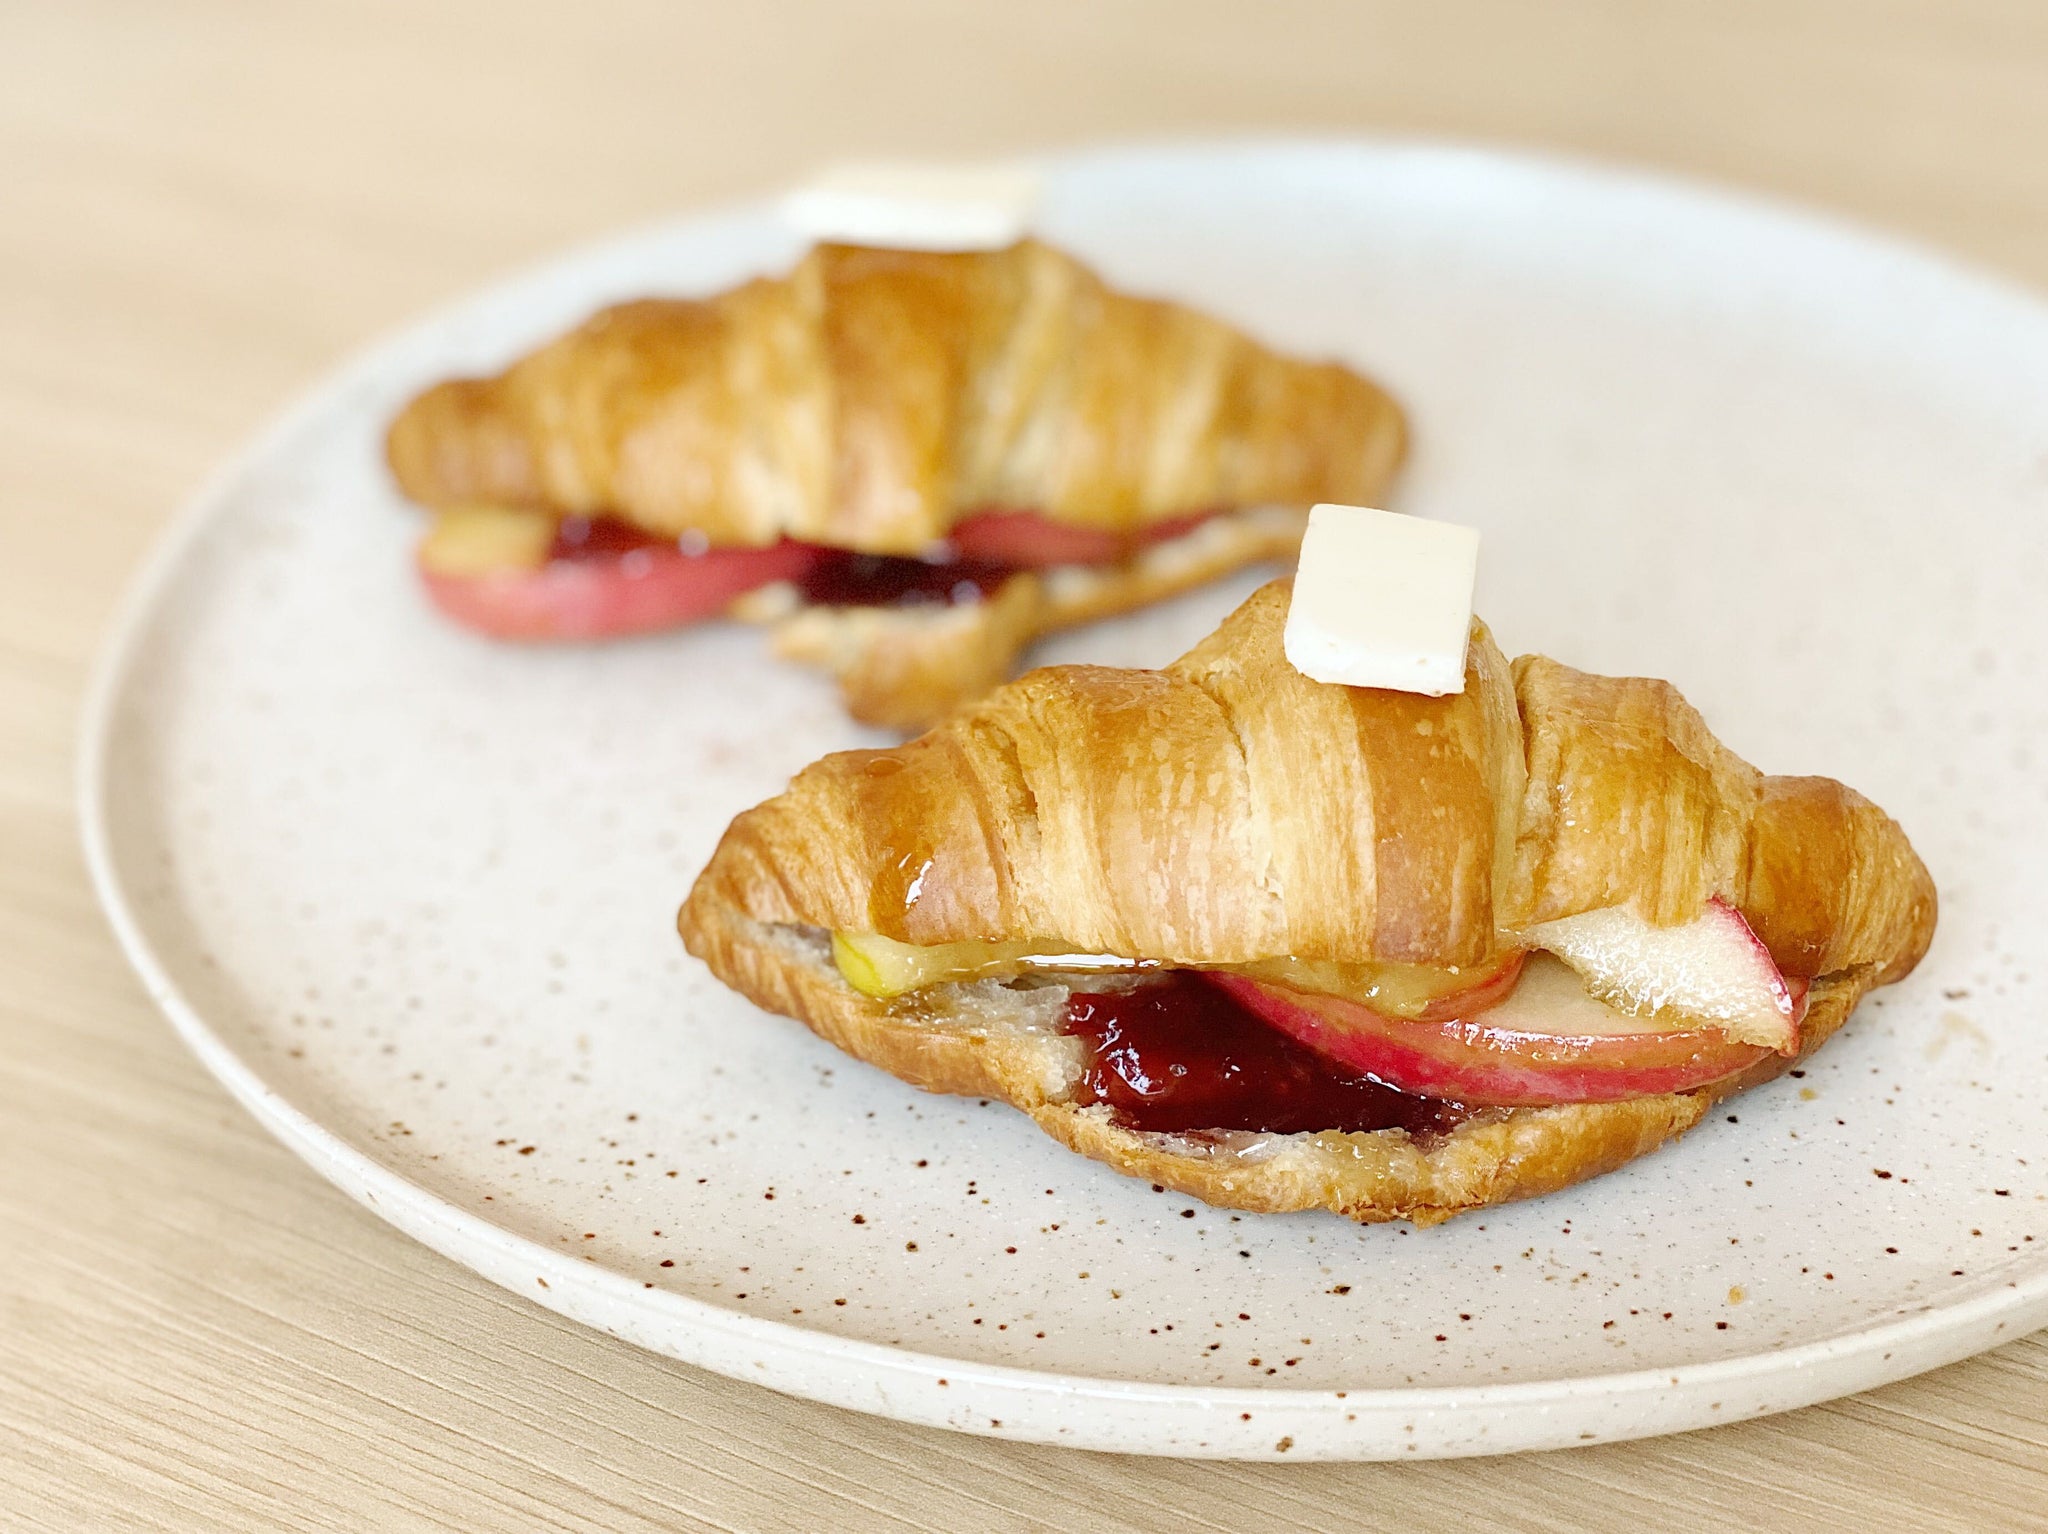 Apple-Strawberry “Galettes”